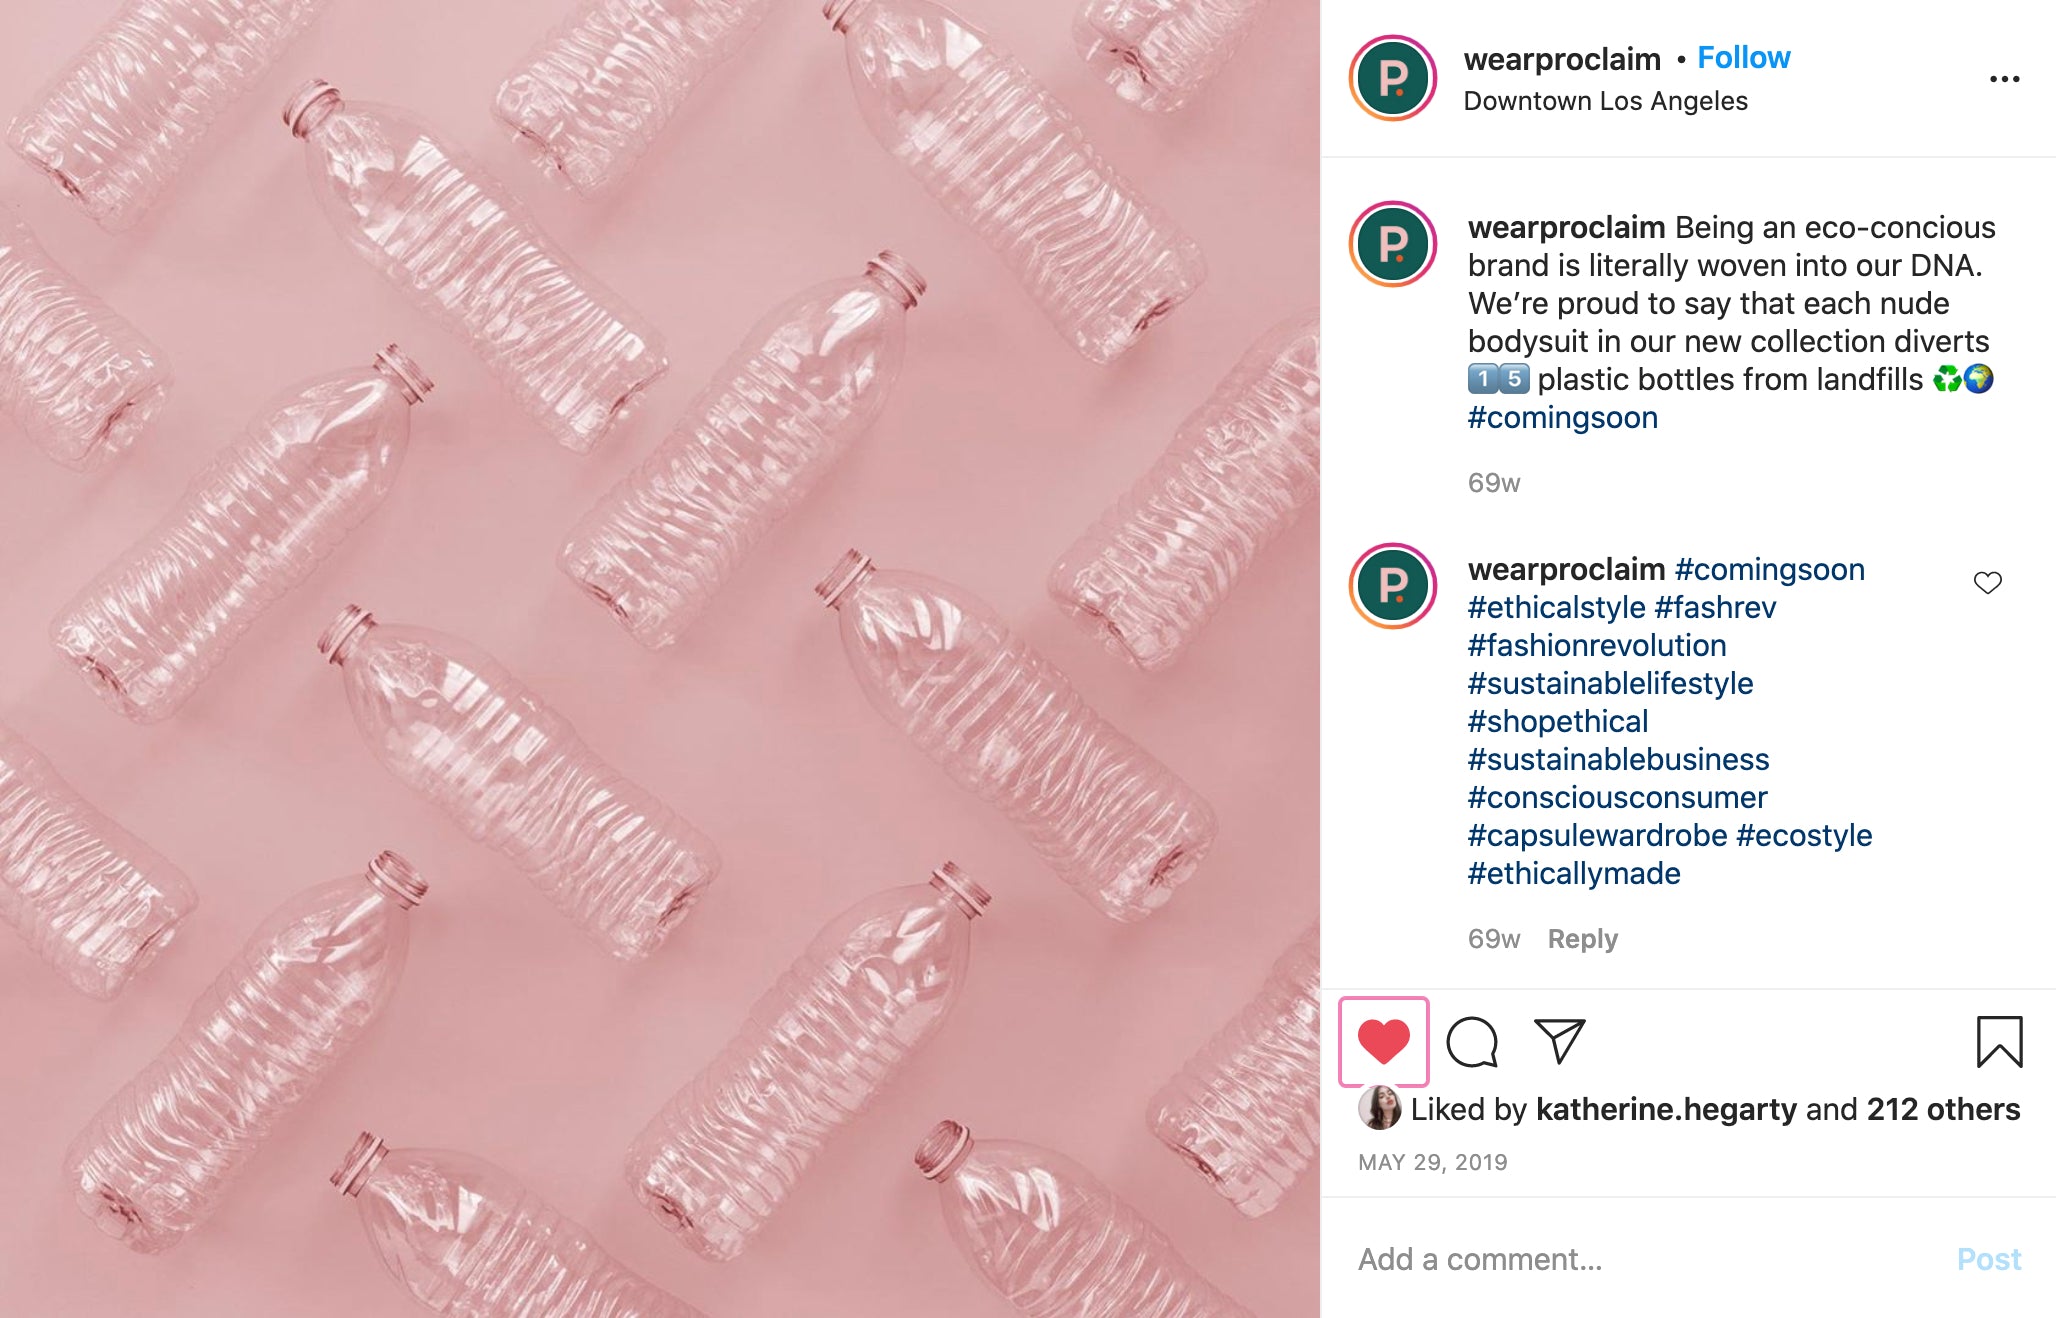 Proclaim Instagram post featuring plastic water bottles against a pink background